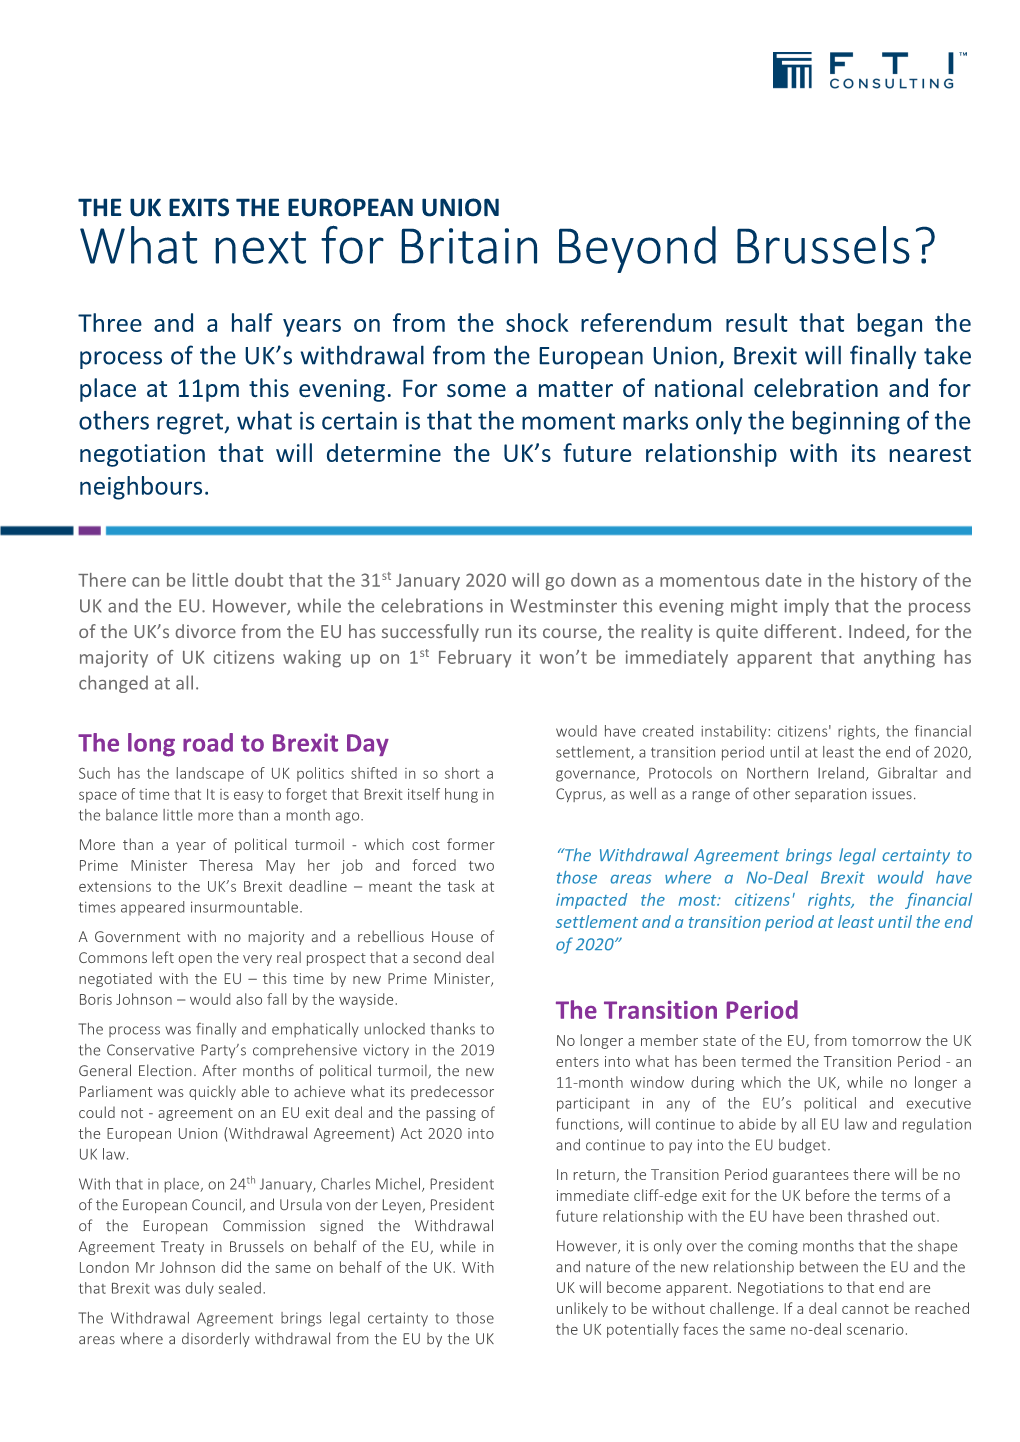 What Next for Britain Beyond Brussels?